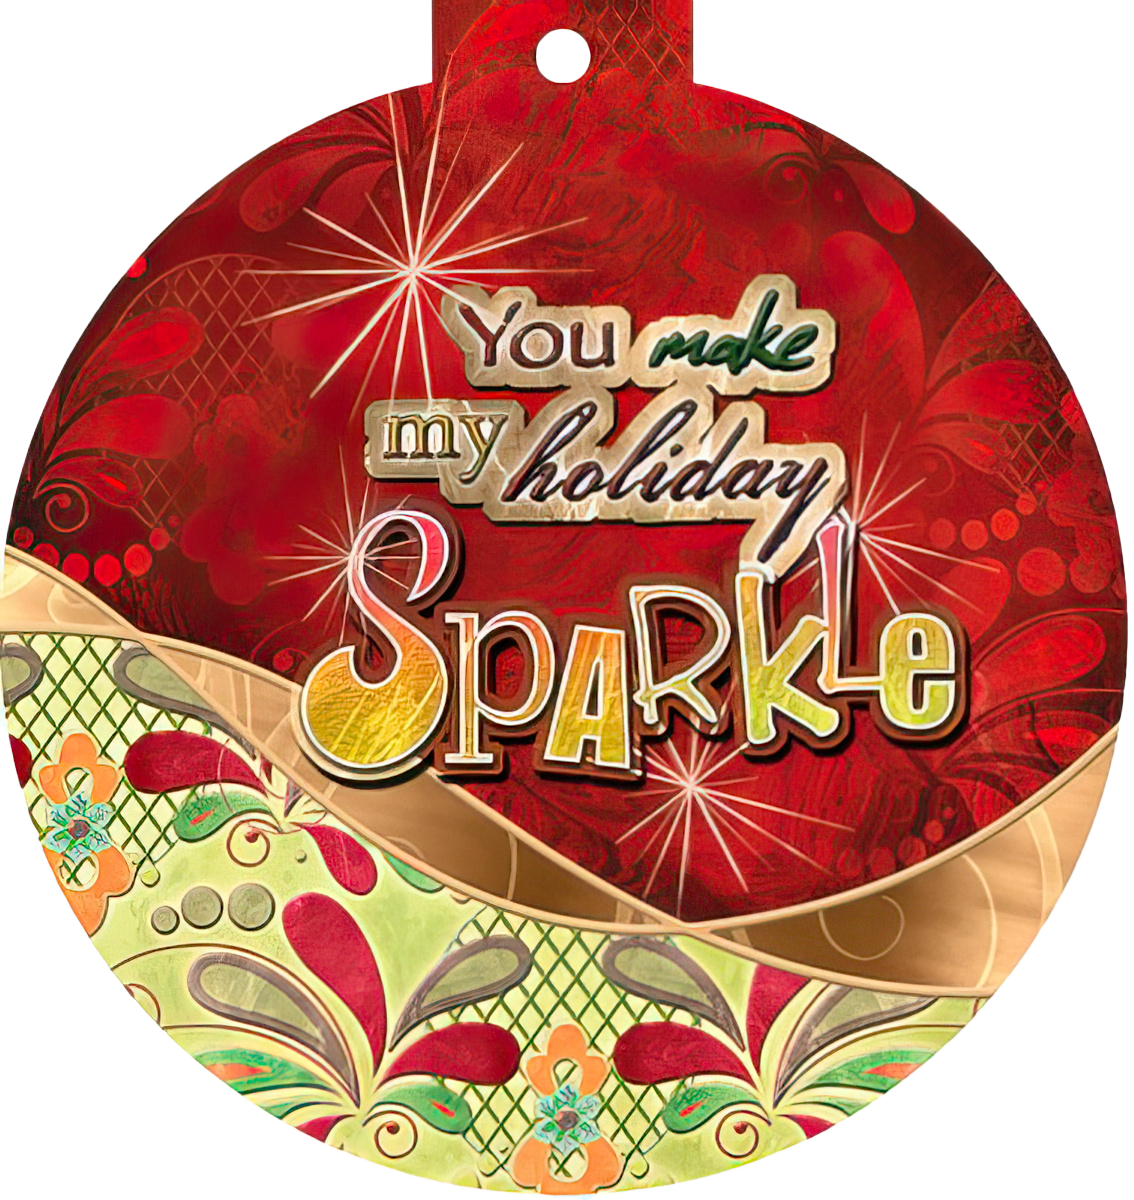 You make my holiday sparkle!